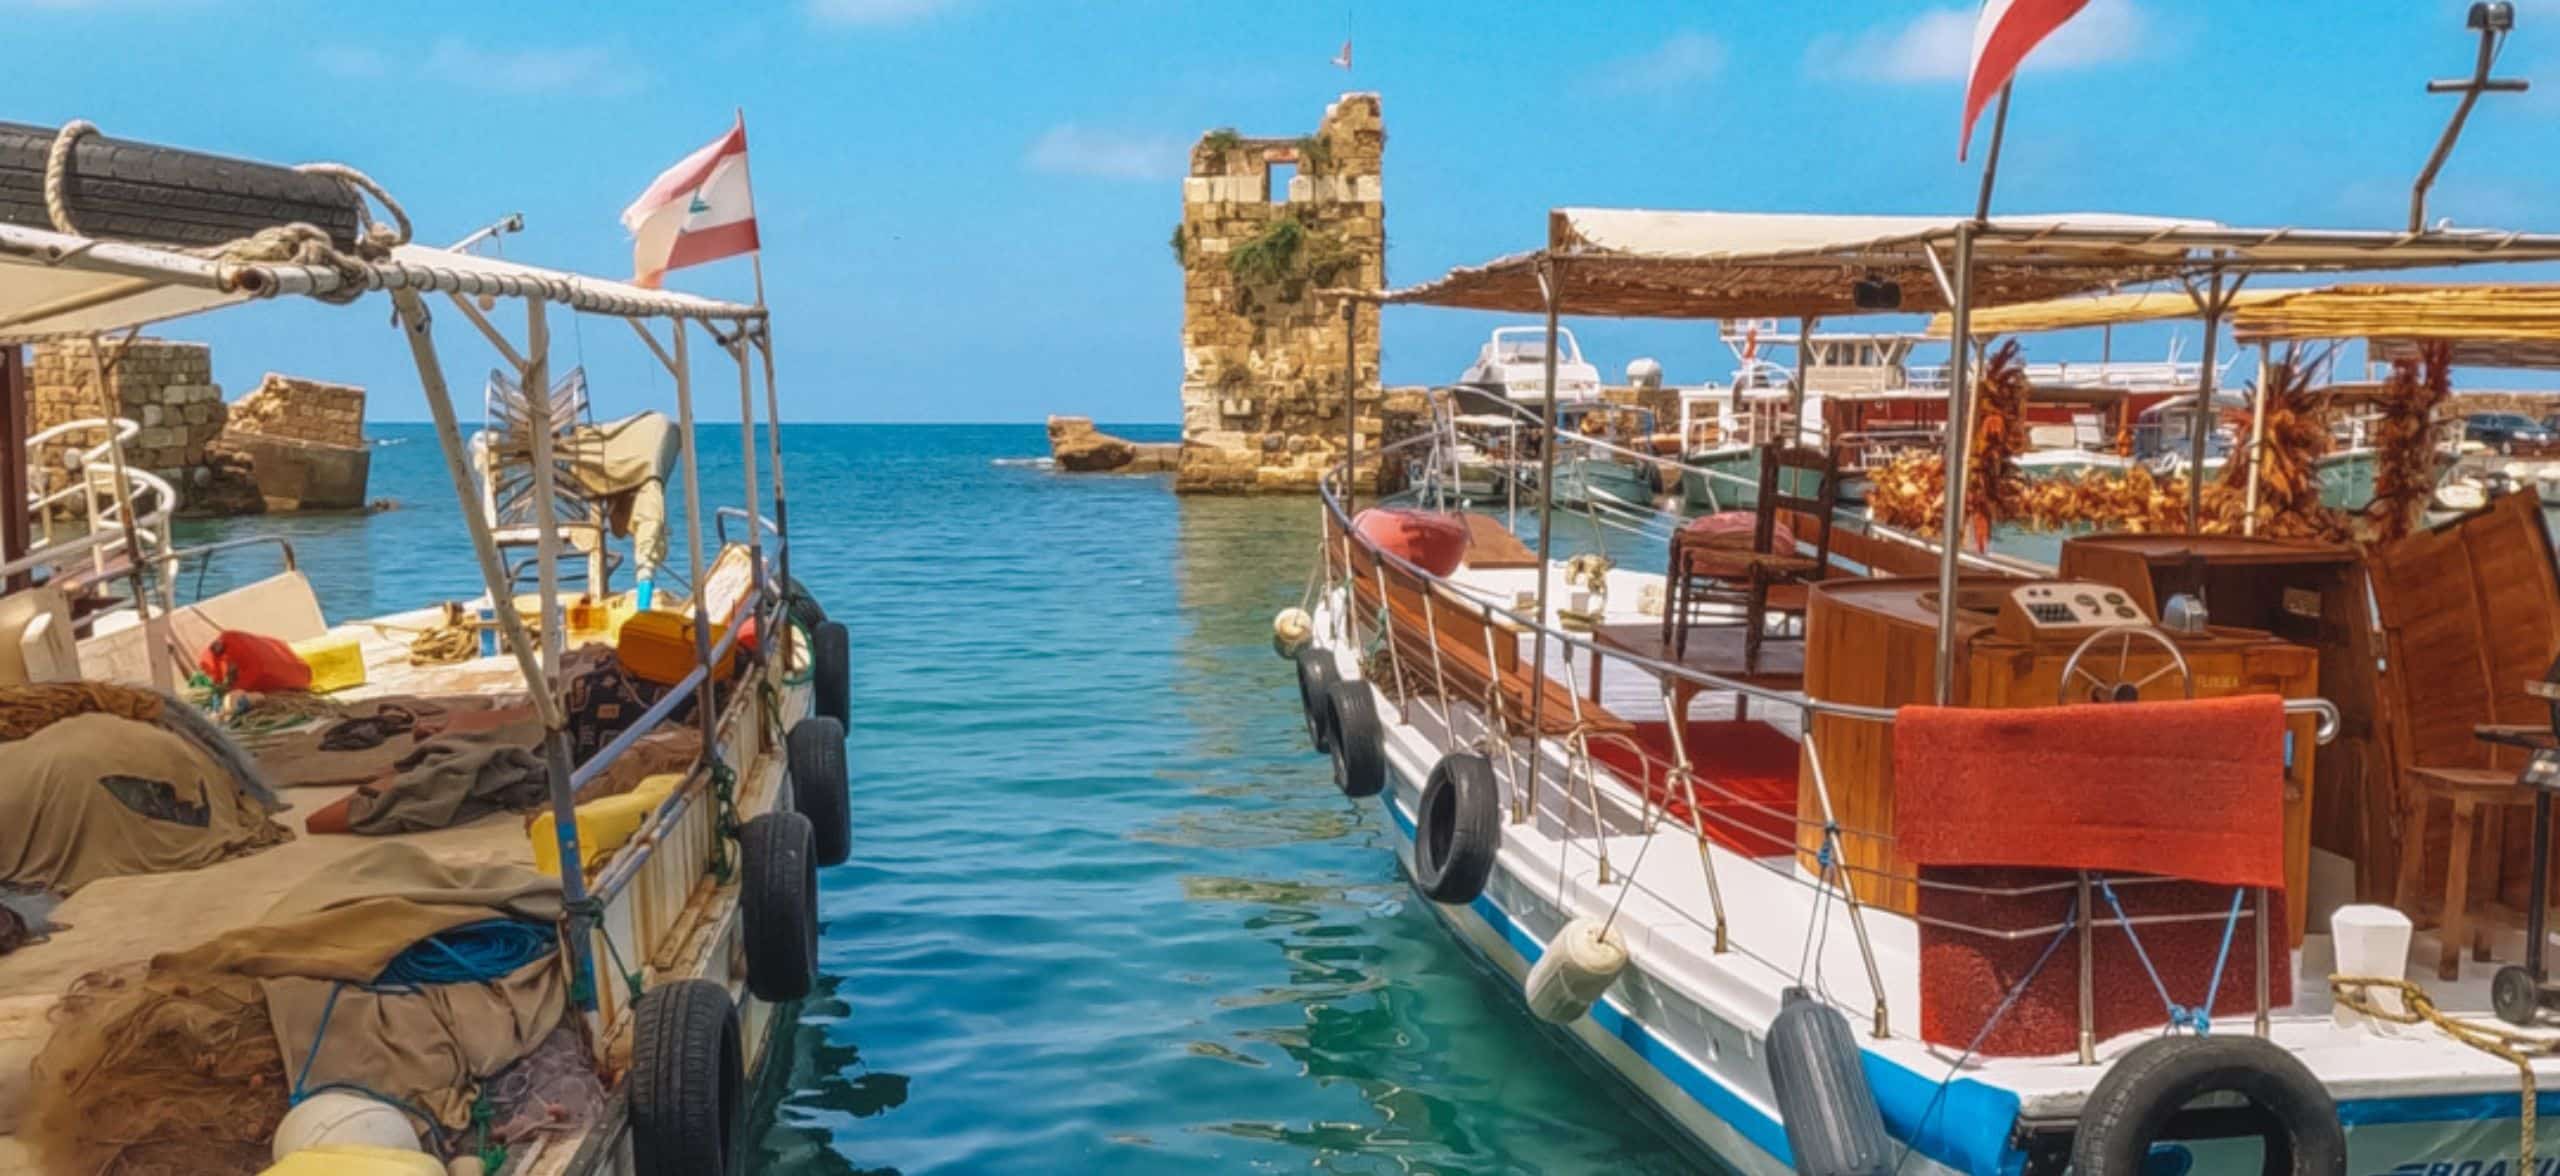 boats in sea - things to do in lebanon